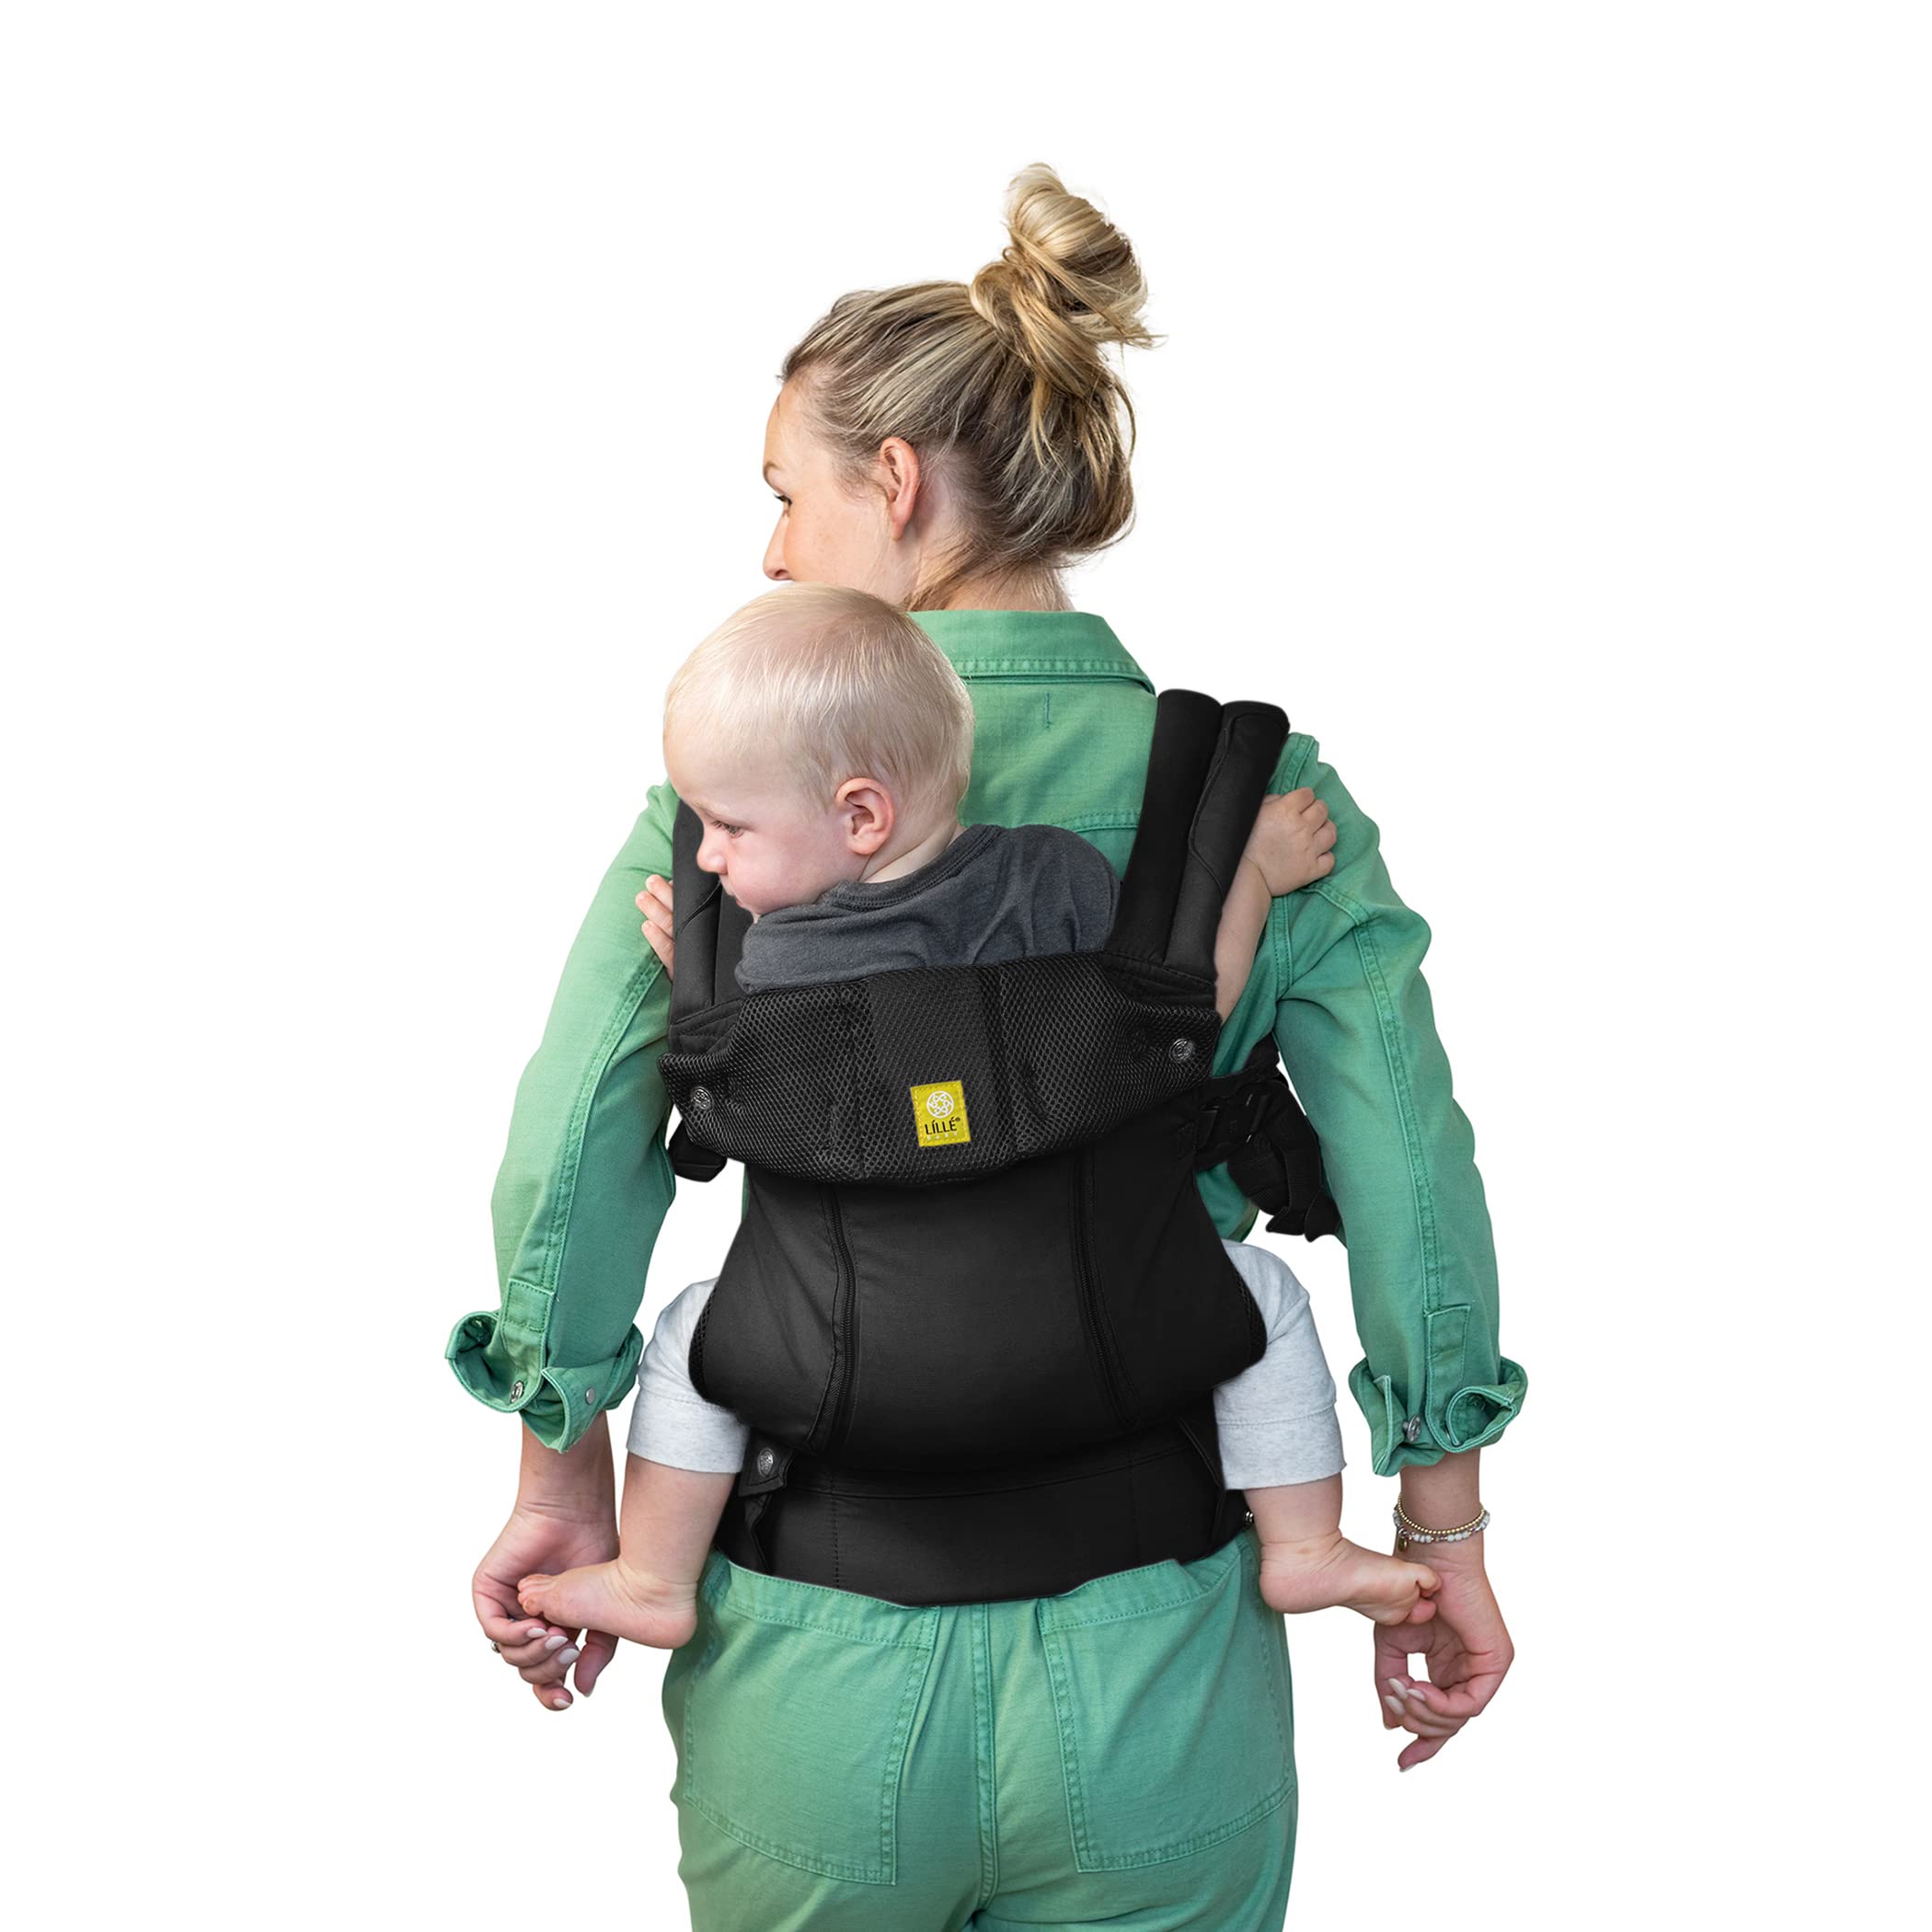 LÍLLÉbaby Complete All Seasons Ergonomic 6-in-1 Baby Carrier Newborn to Toddler - with Lumbar Support - for Children 7-45 Pounds - 360 Degree Baby Wearing - Inward & Outward Facing - Black